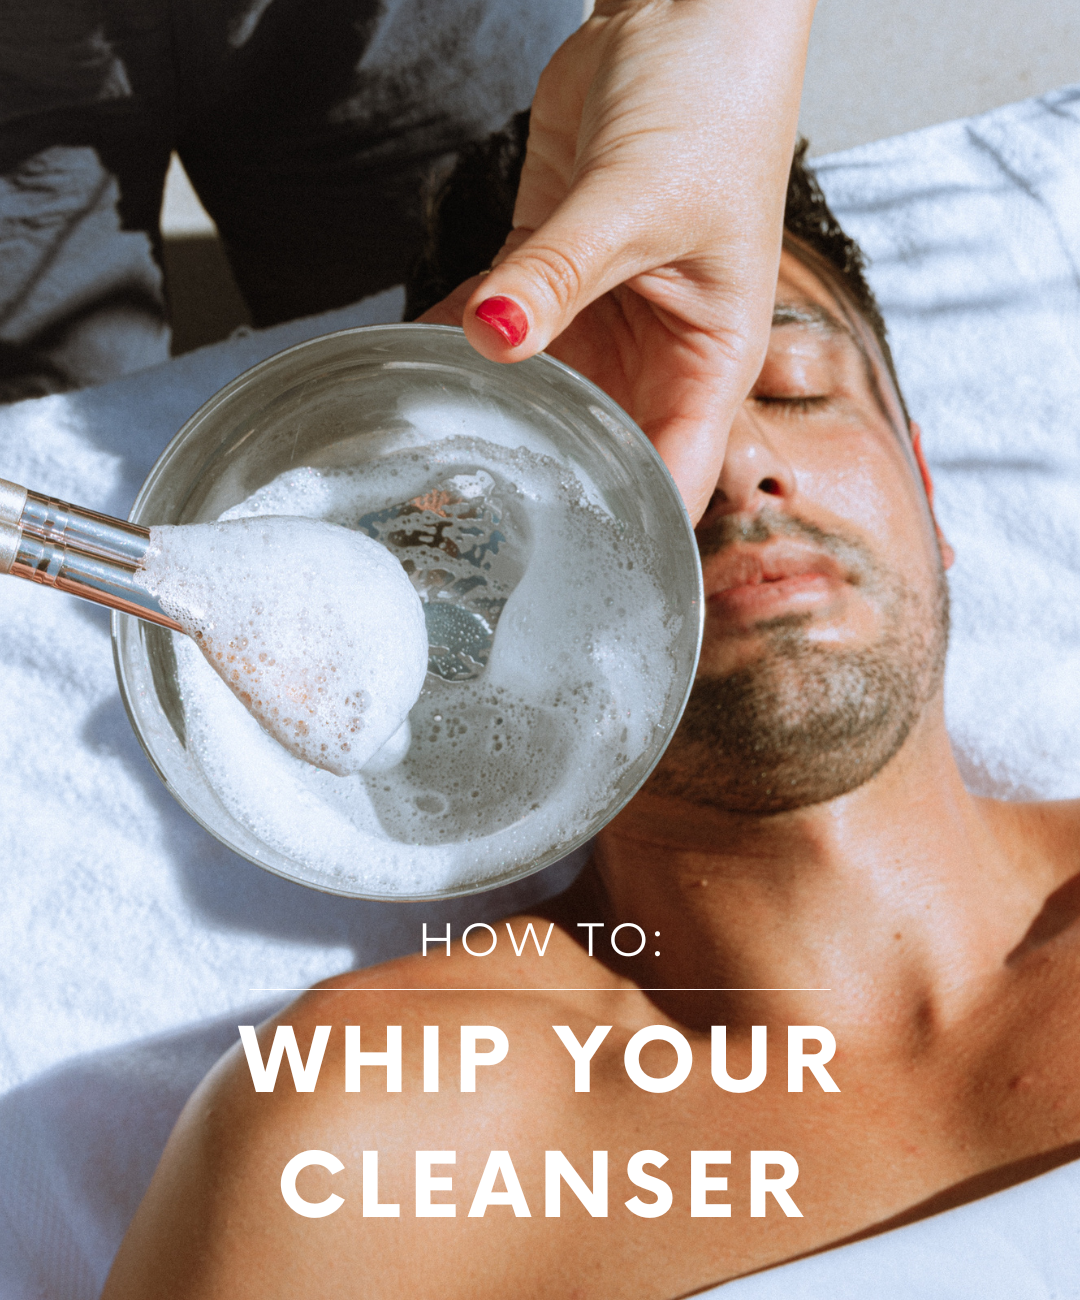 How to: Whip your Cleanser